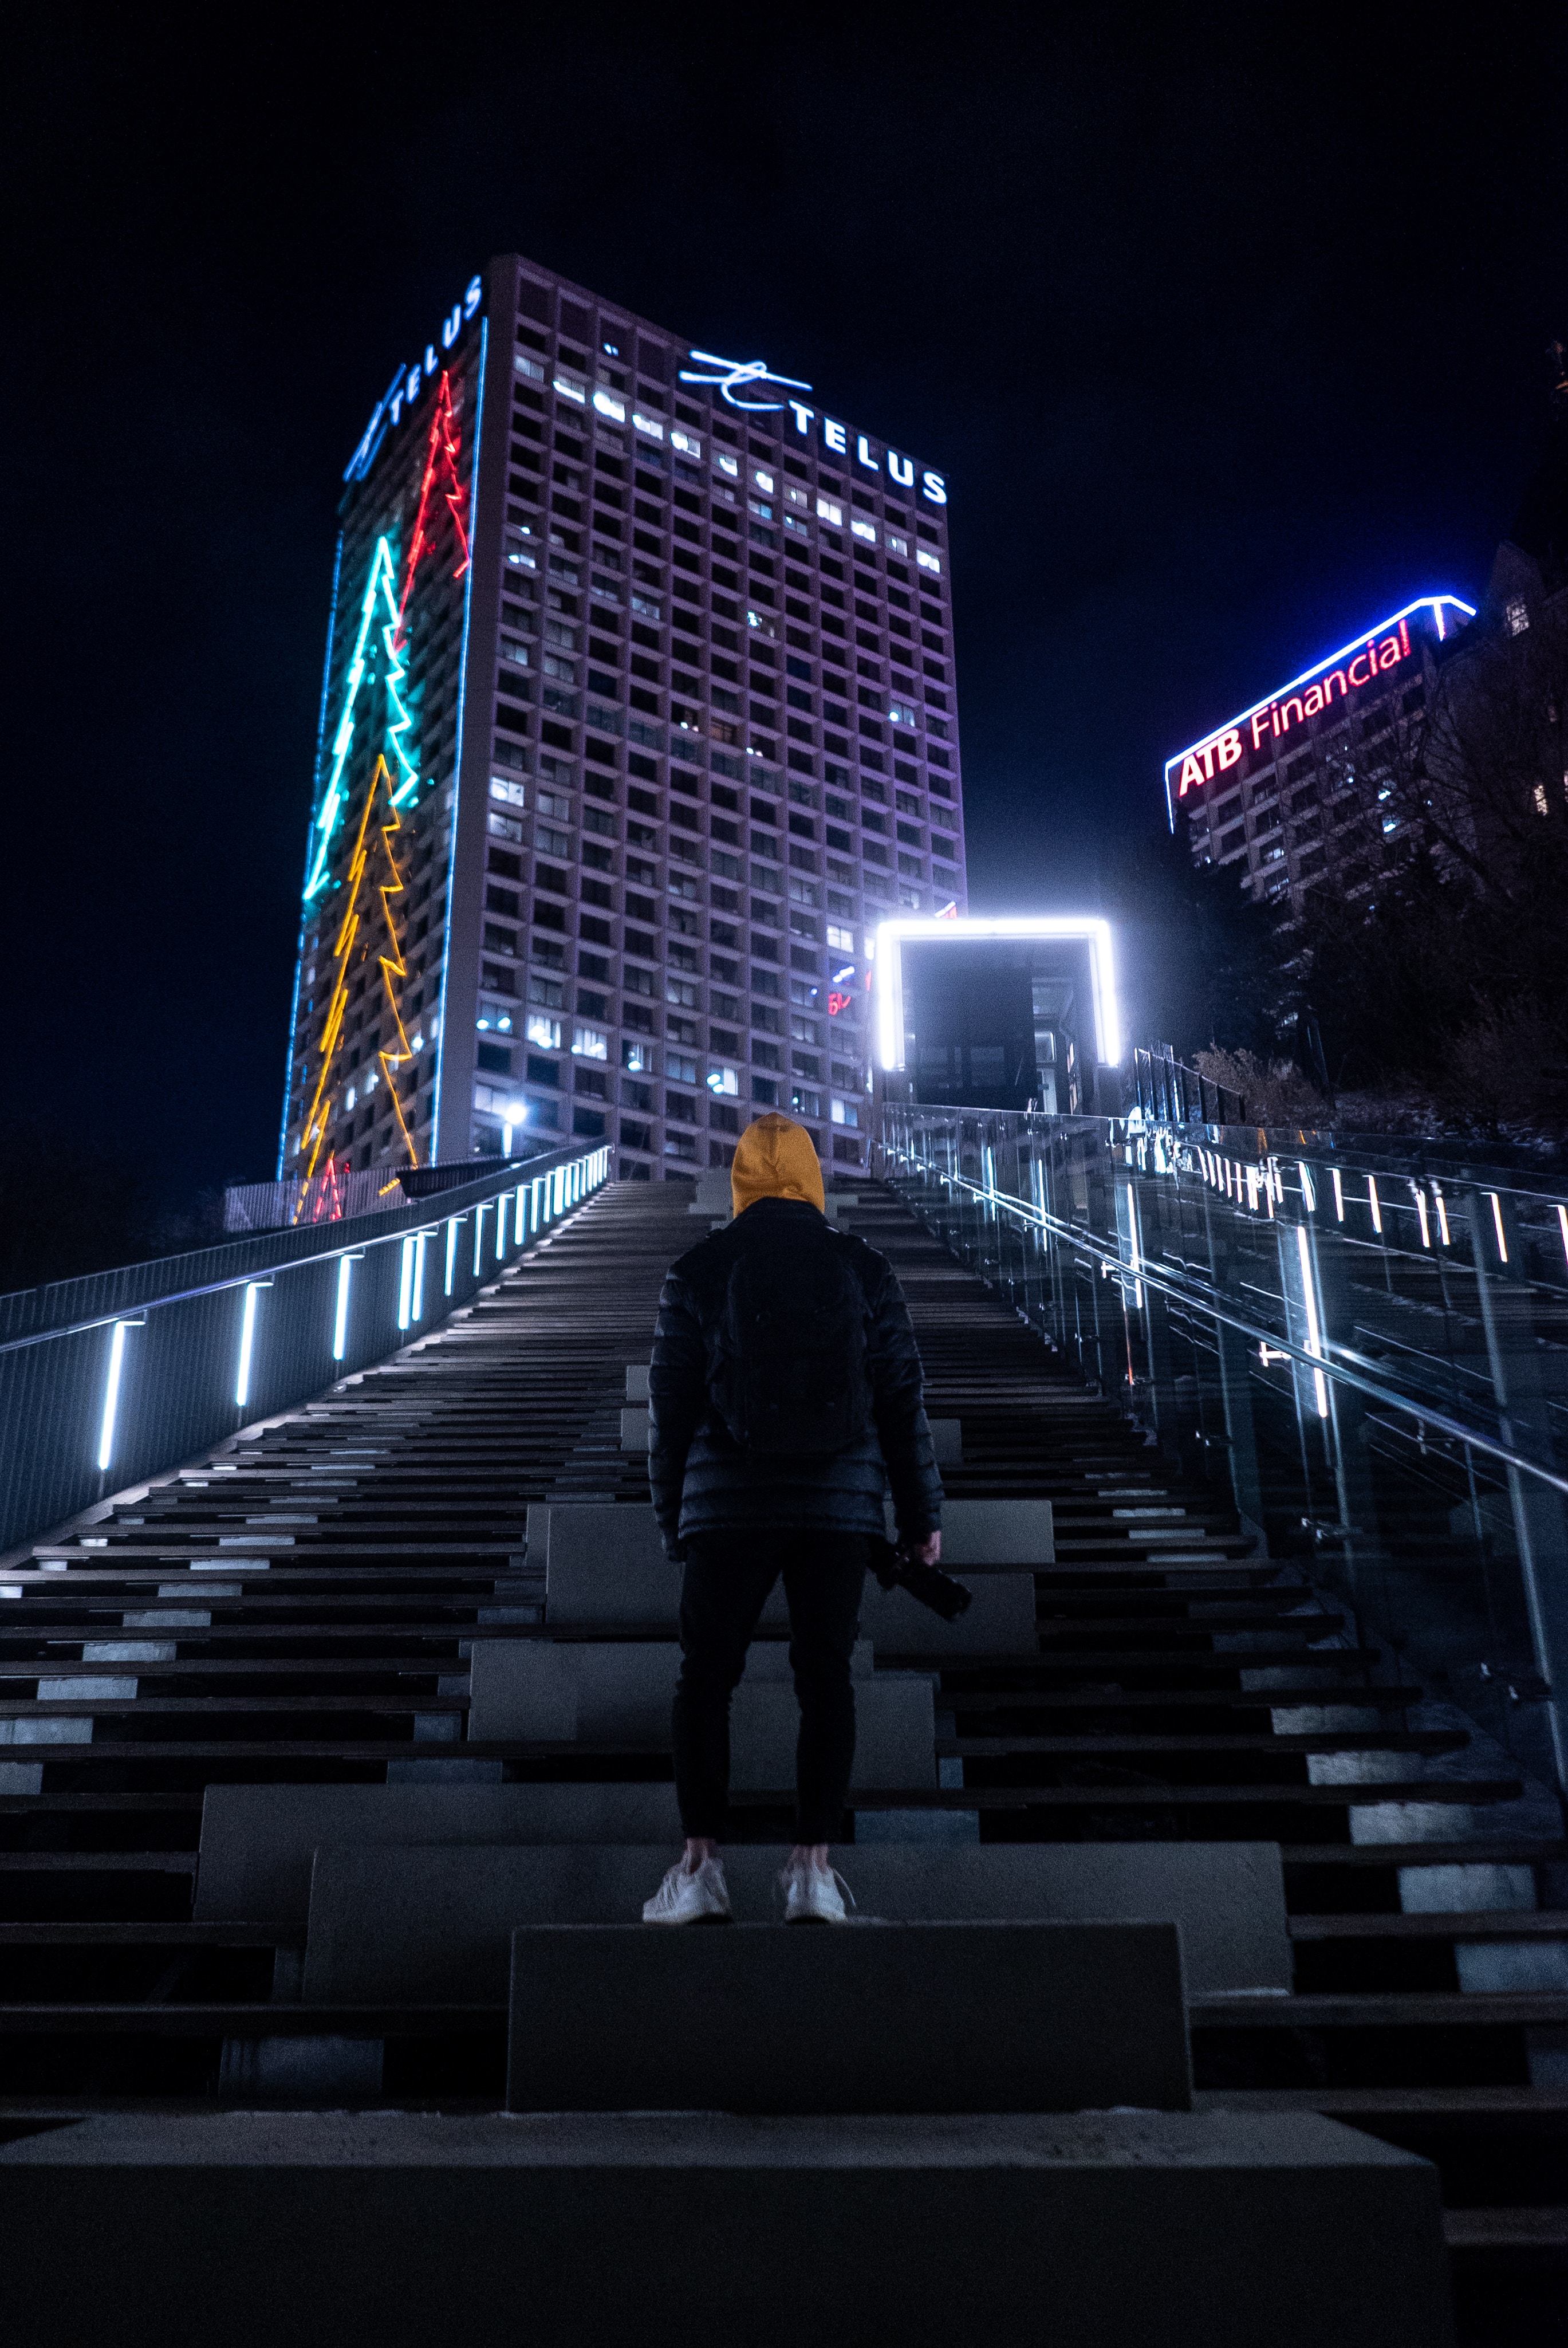 dark, lonely, alone, building, night city, human, person, hood